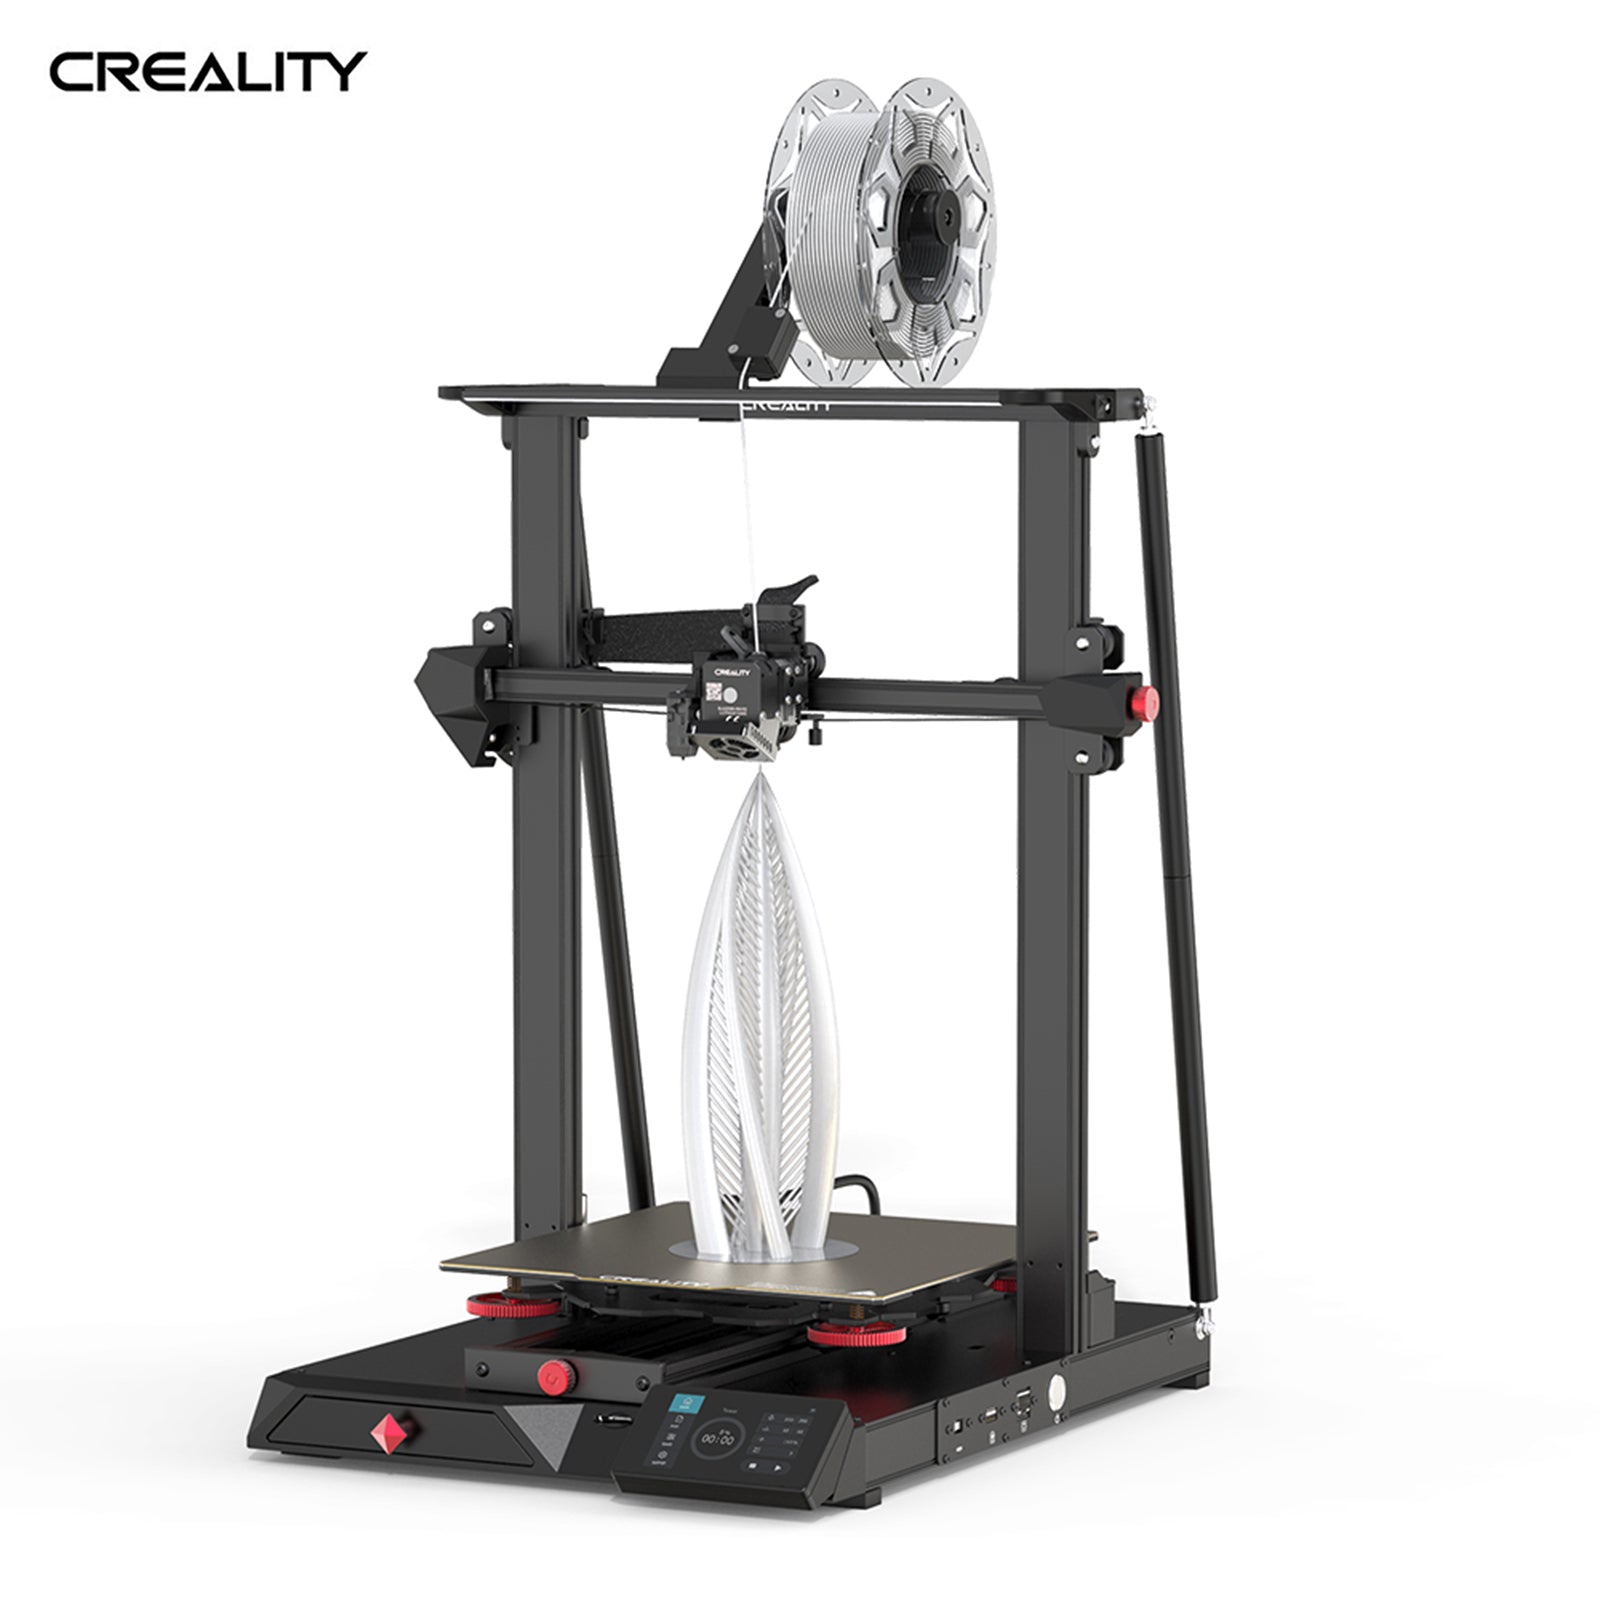 Creality 3D CR-10 Smart Pro FDM 3D Printer Remote Control with AI HD Camera LED Light Dual-mode Levelling Filament Detection Full-metal Dual-gear Direct Extruder for PETG/Wood/Carbon/PA